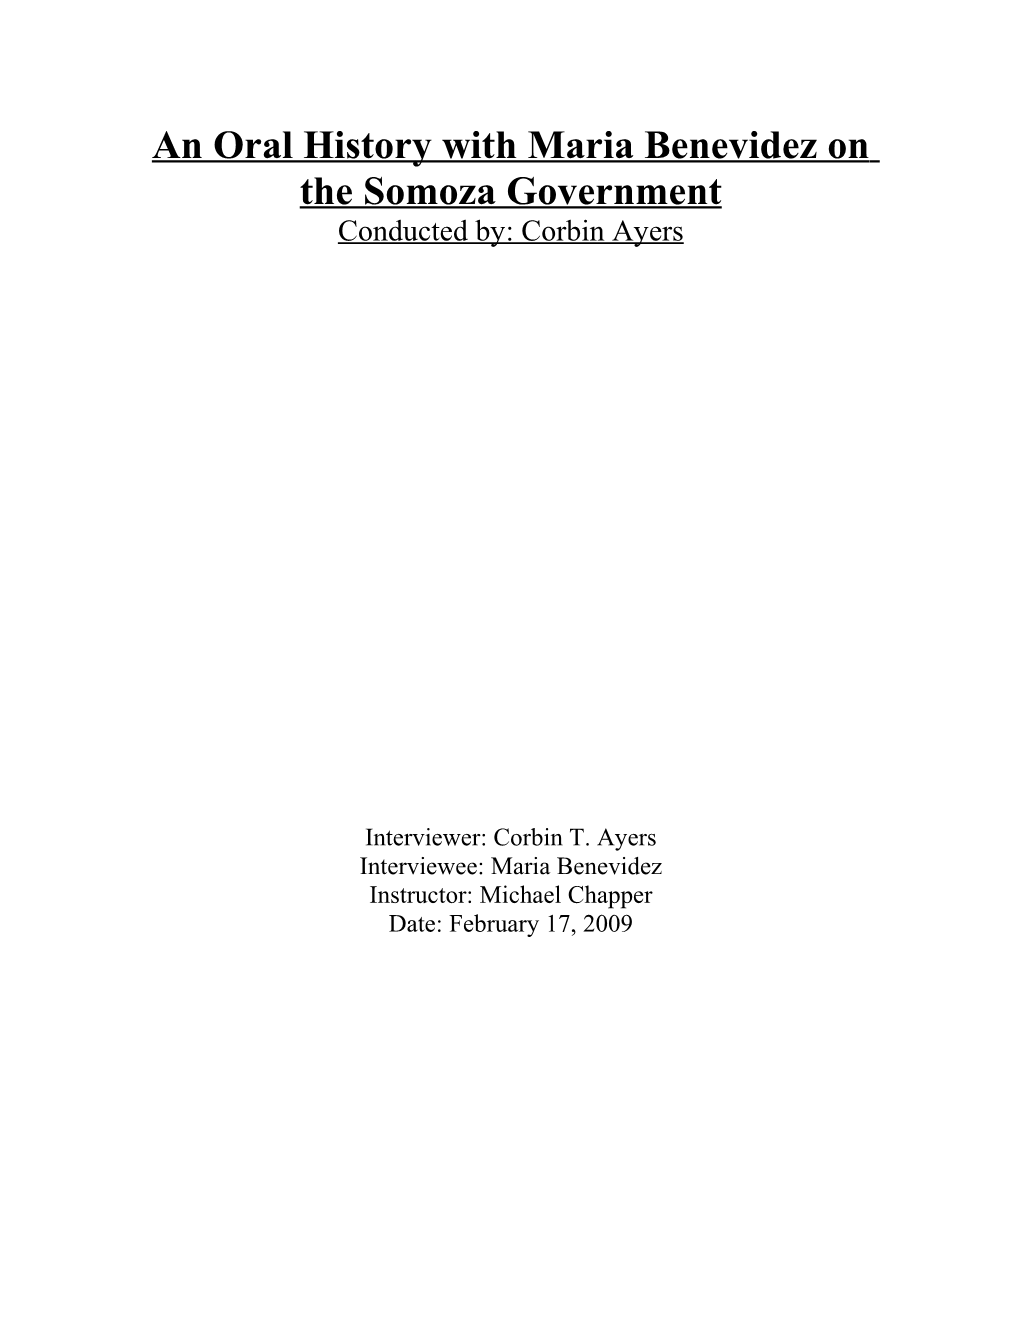 An Oral History with Maria Benevidez on the Somoza Government Conducted By: Corbin Ayers